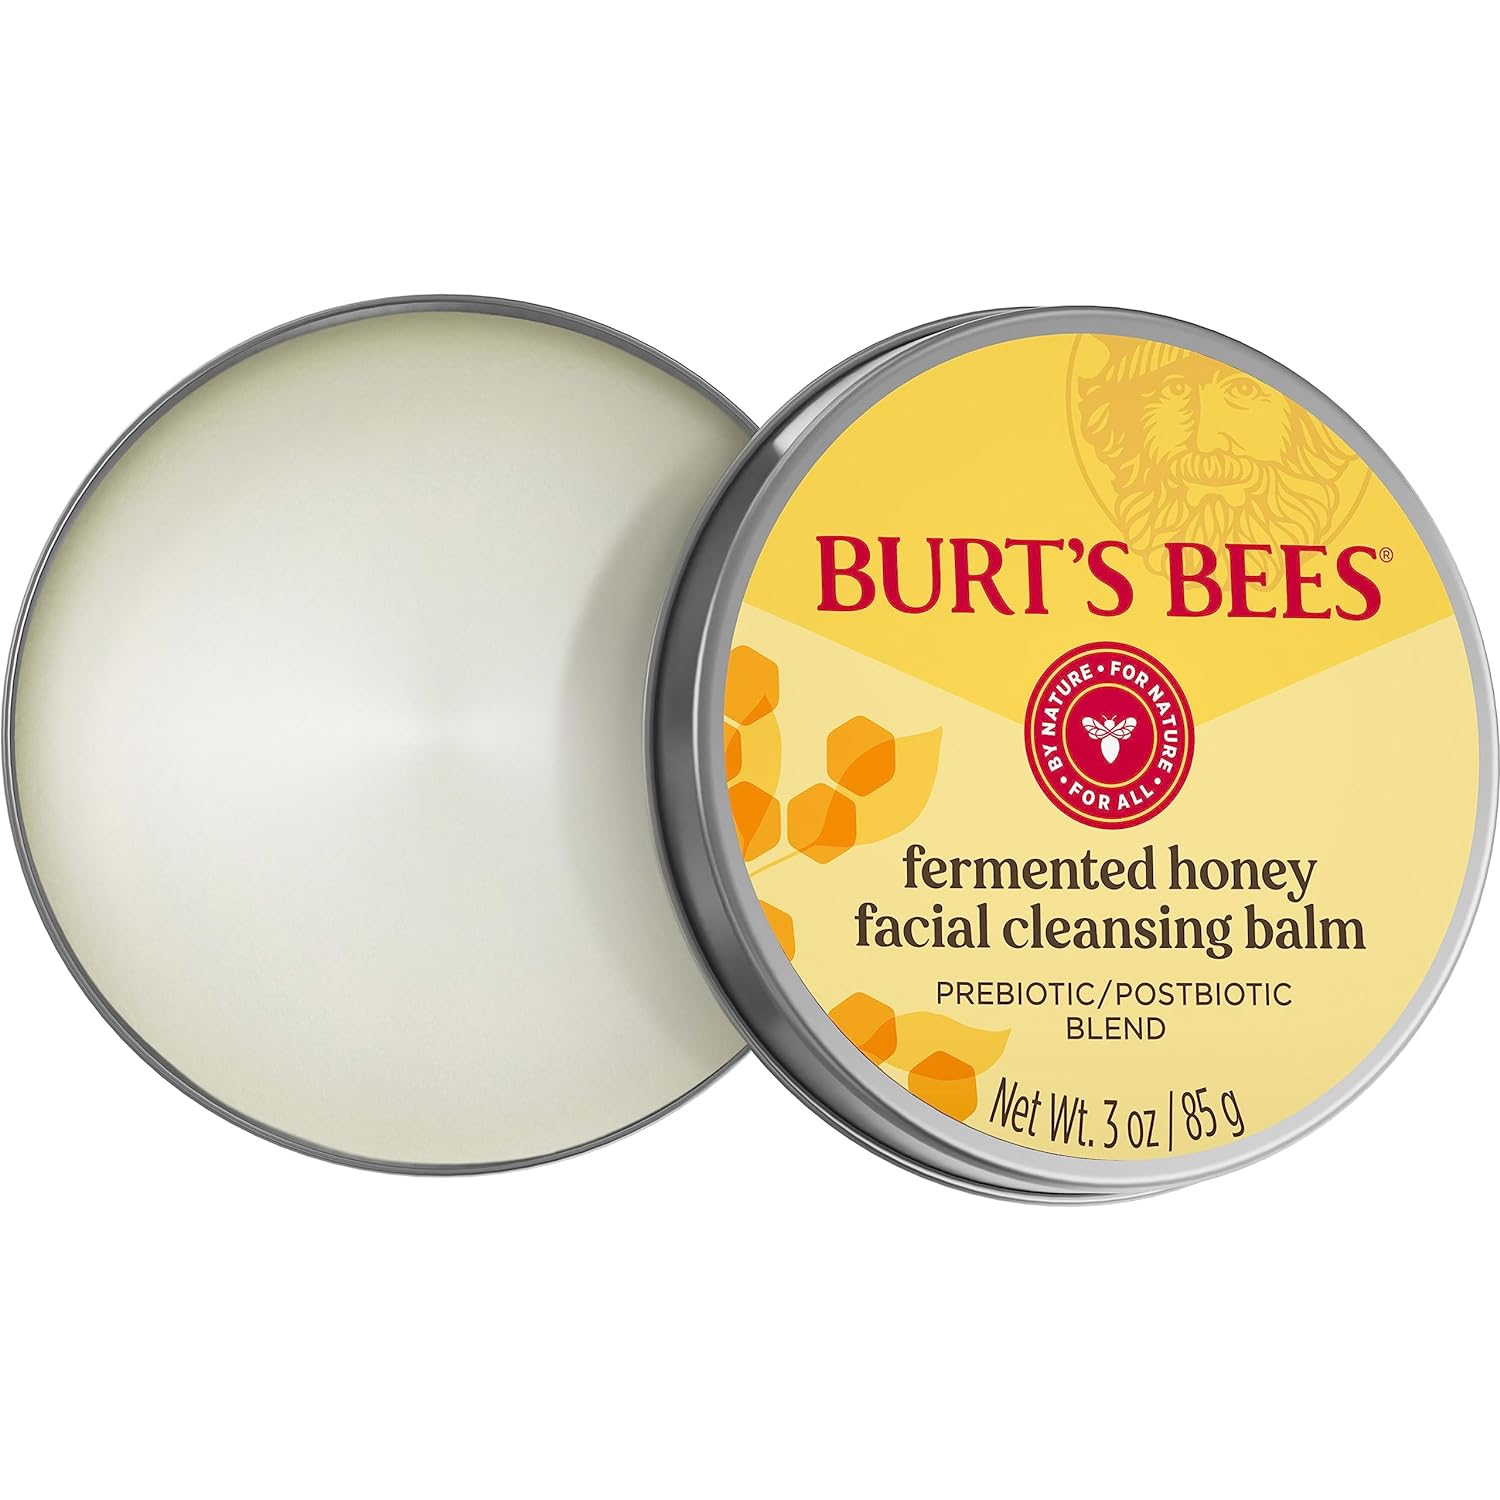 Burt's Bees Fermented Honey Facial Cleansing Balm, With Prebiotic and Postbiotic Blend, Contains Fermented Honey and Green Tea, Natural Origin Skin Care, 1 Tin, 3 oz